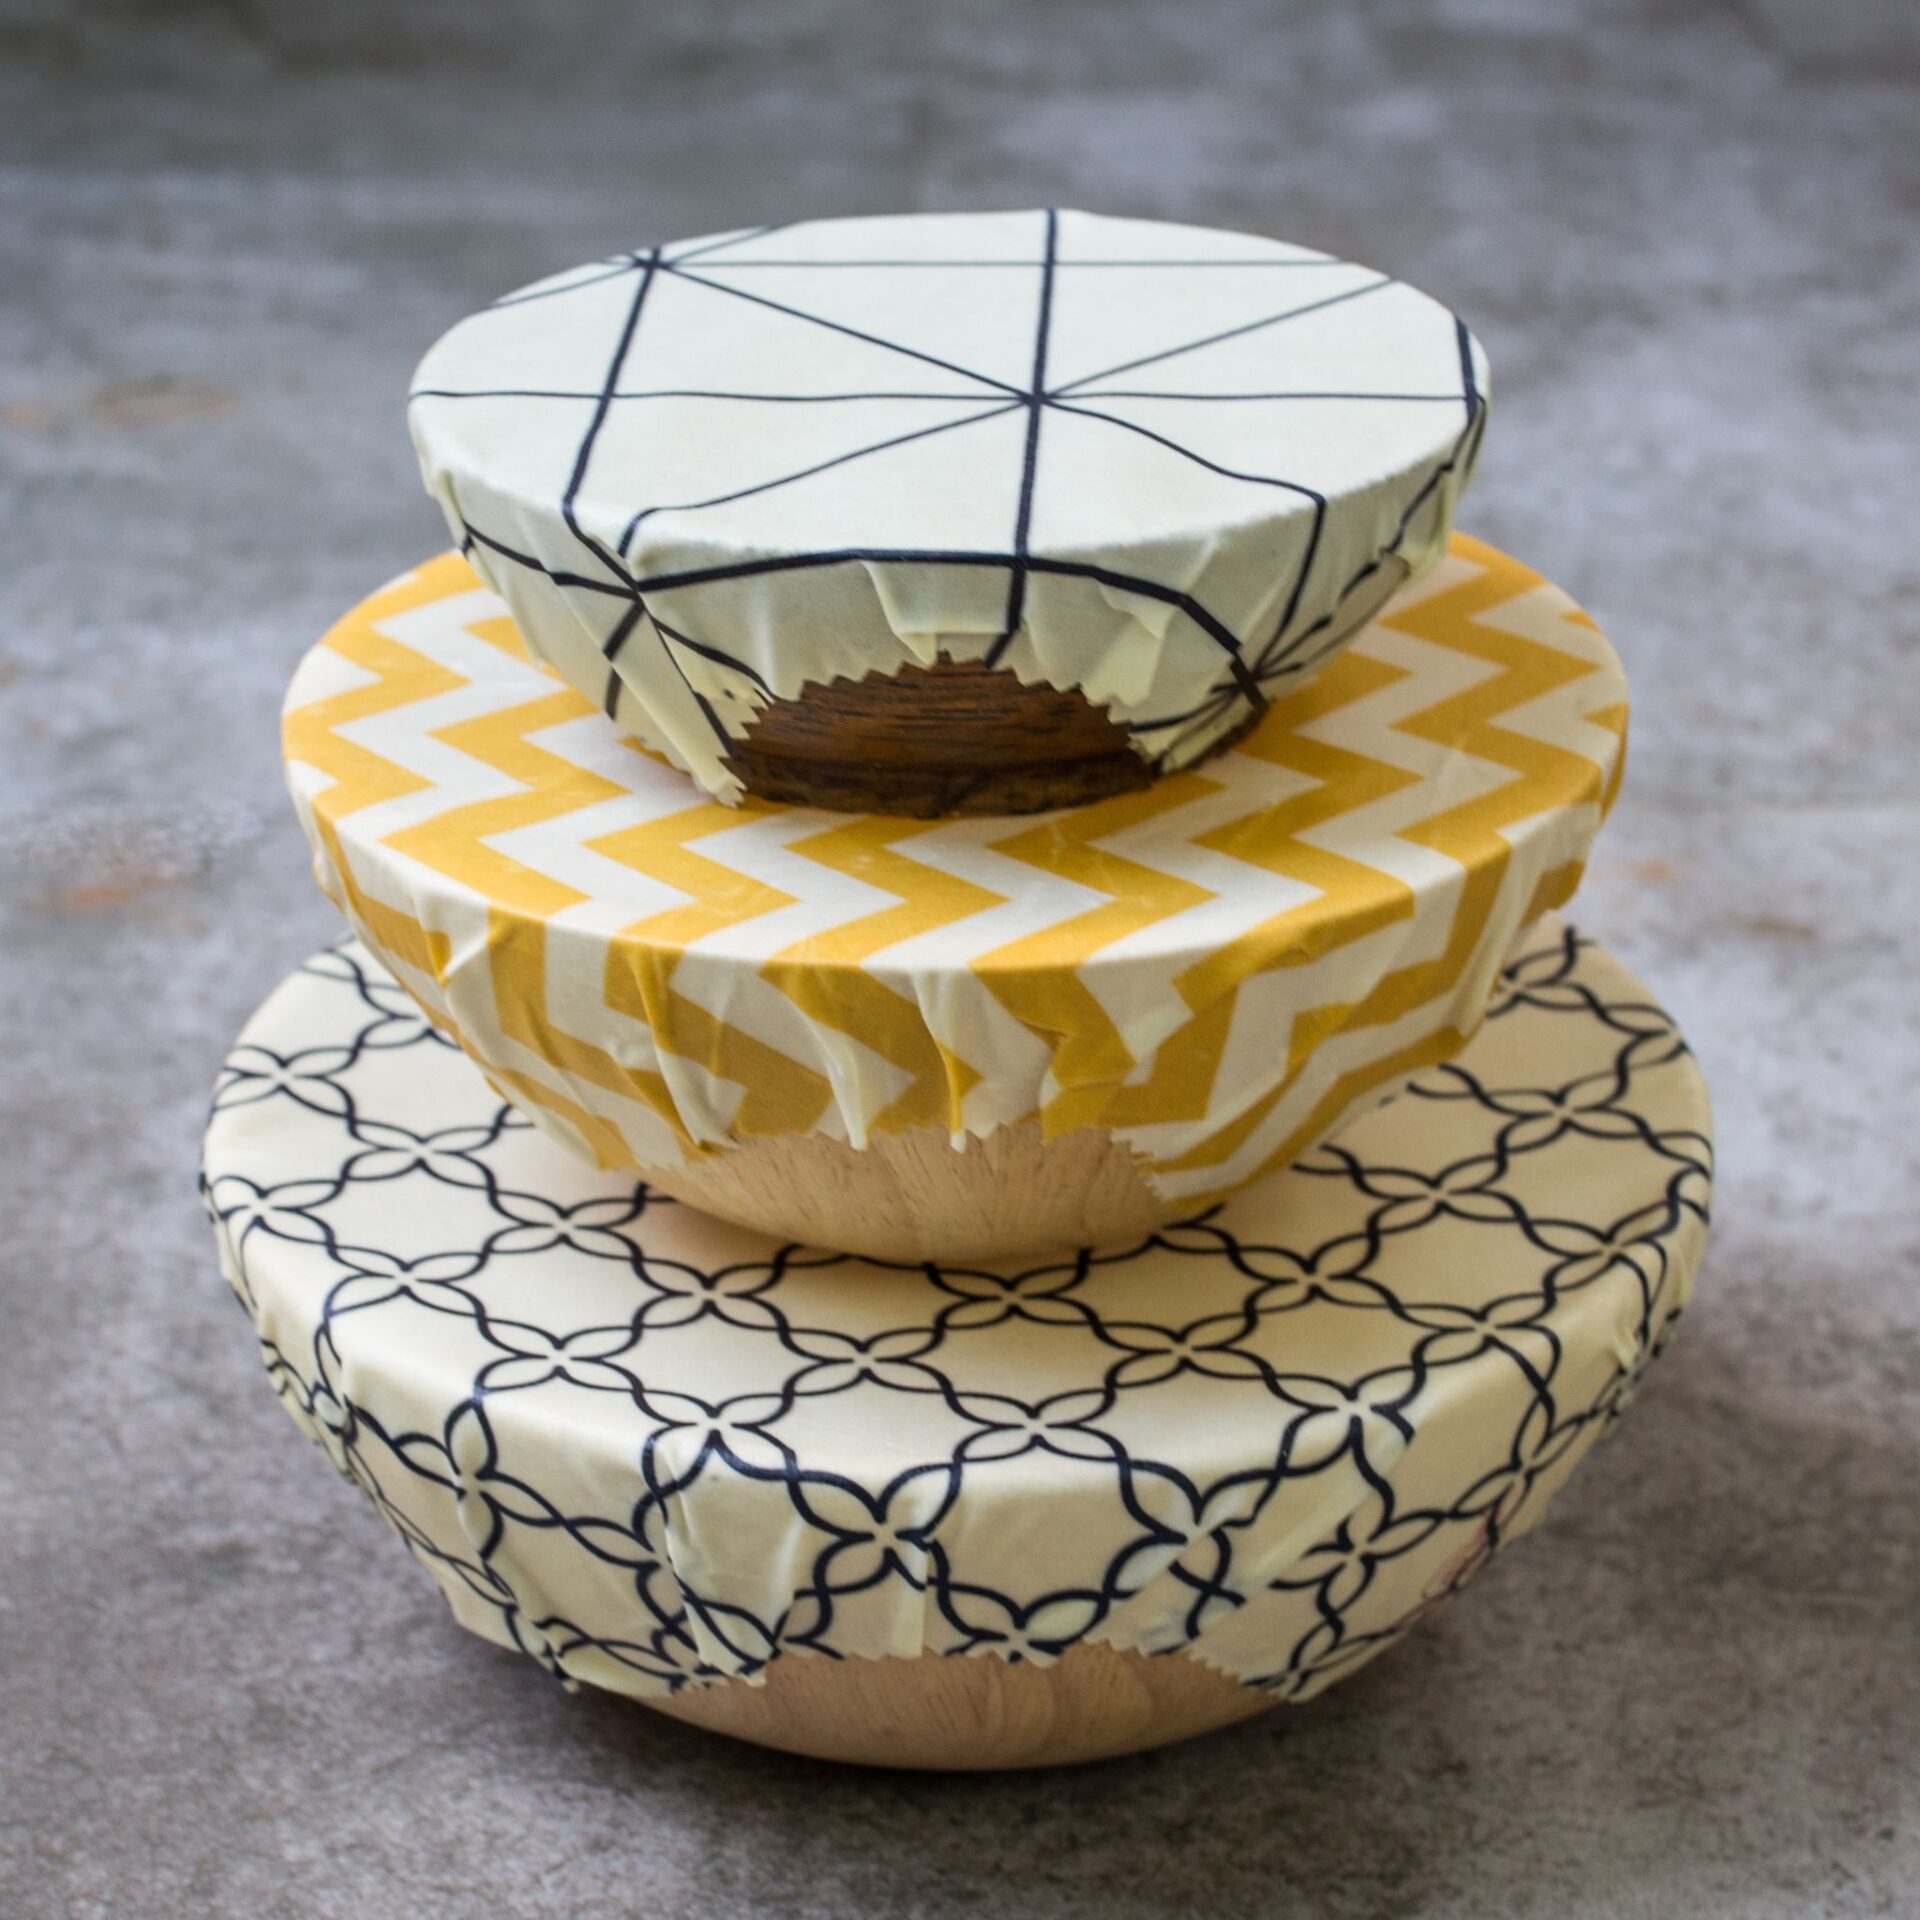 Buy SUPERBEE Beeswax Wrap for Food, Set of 3 Bees Wax Wraps